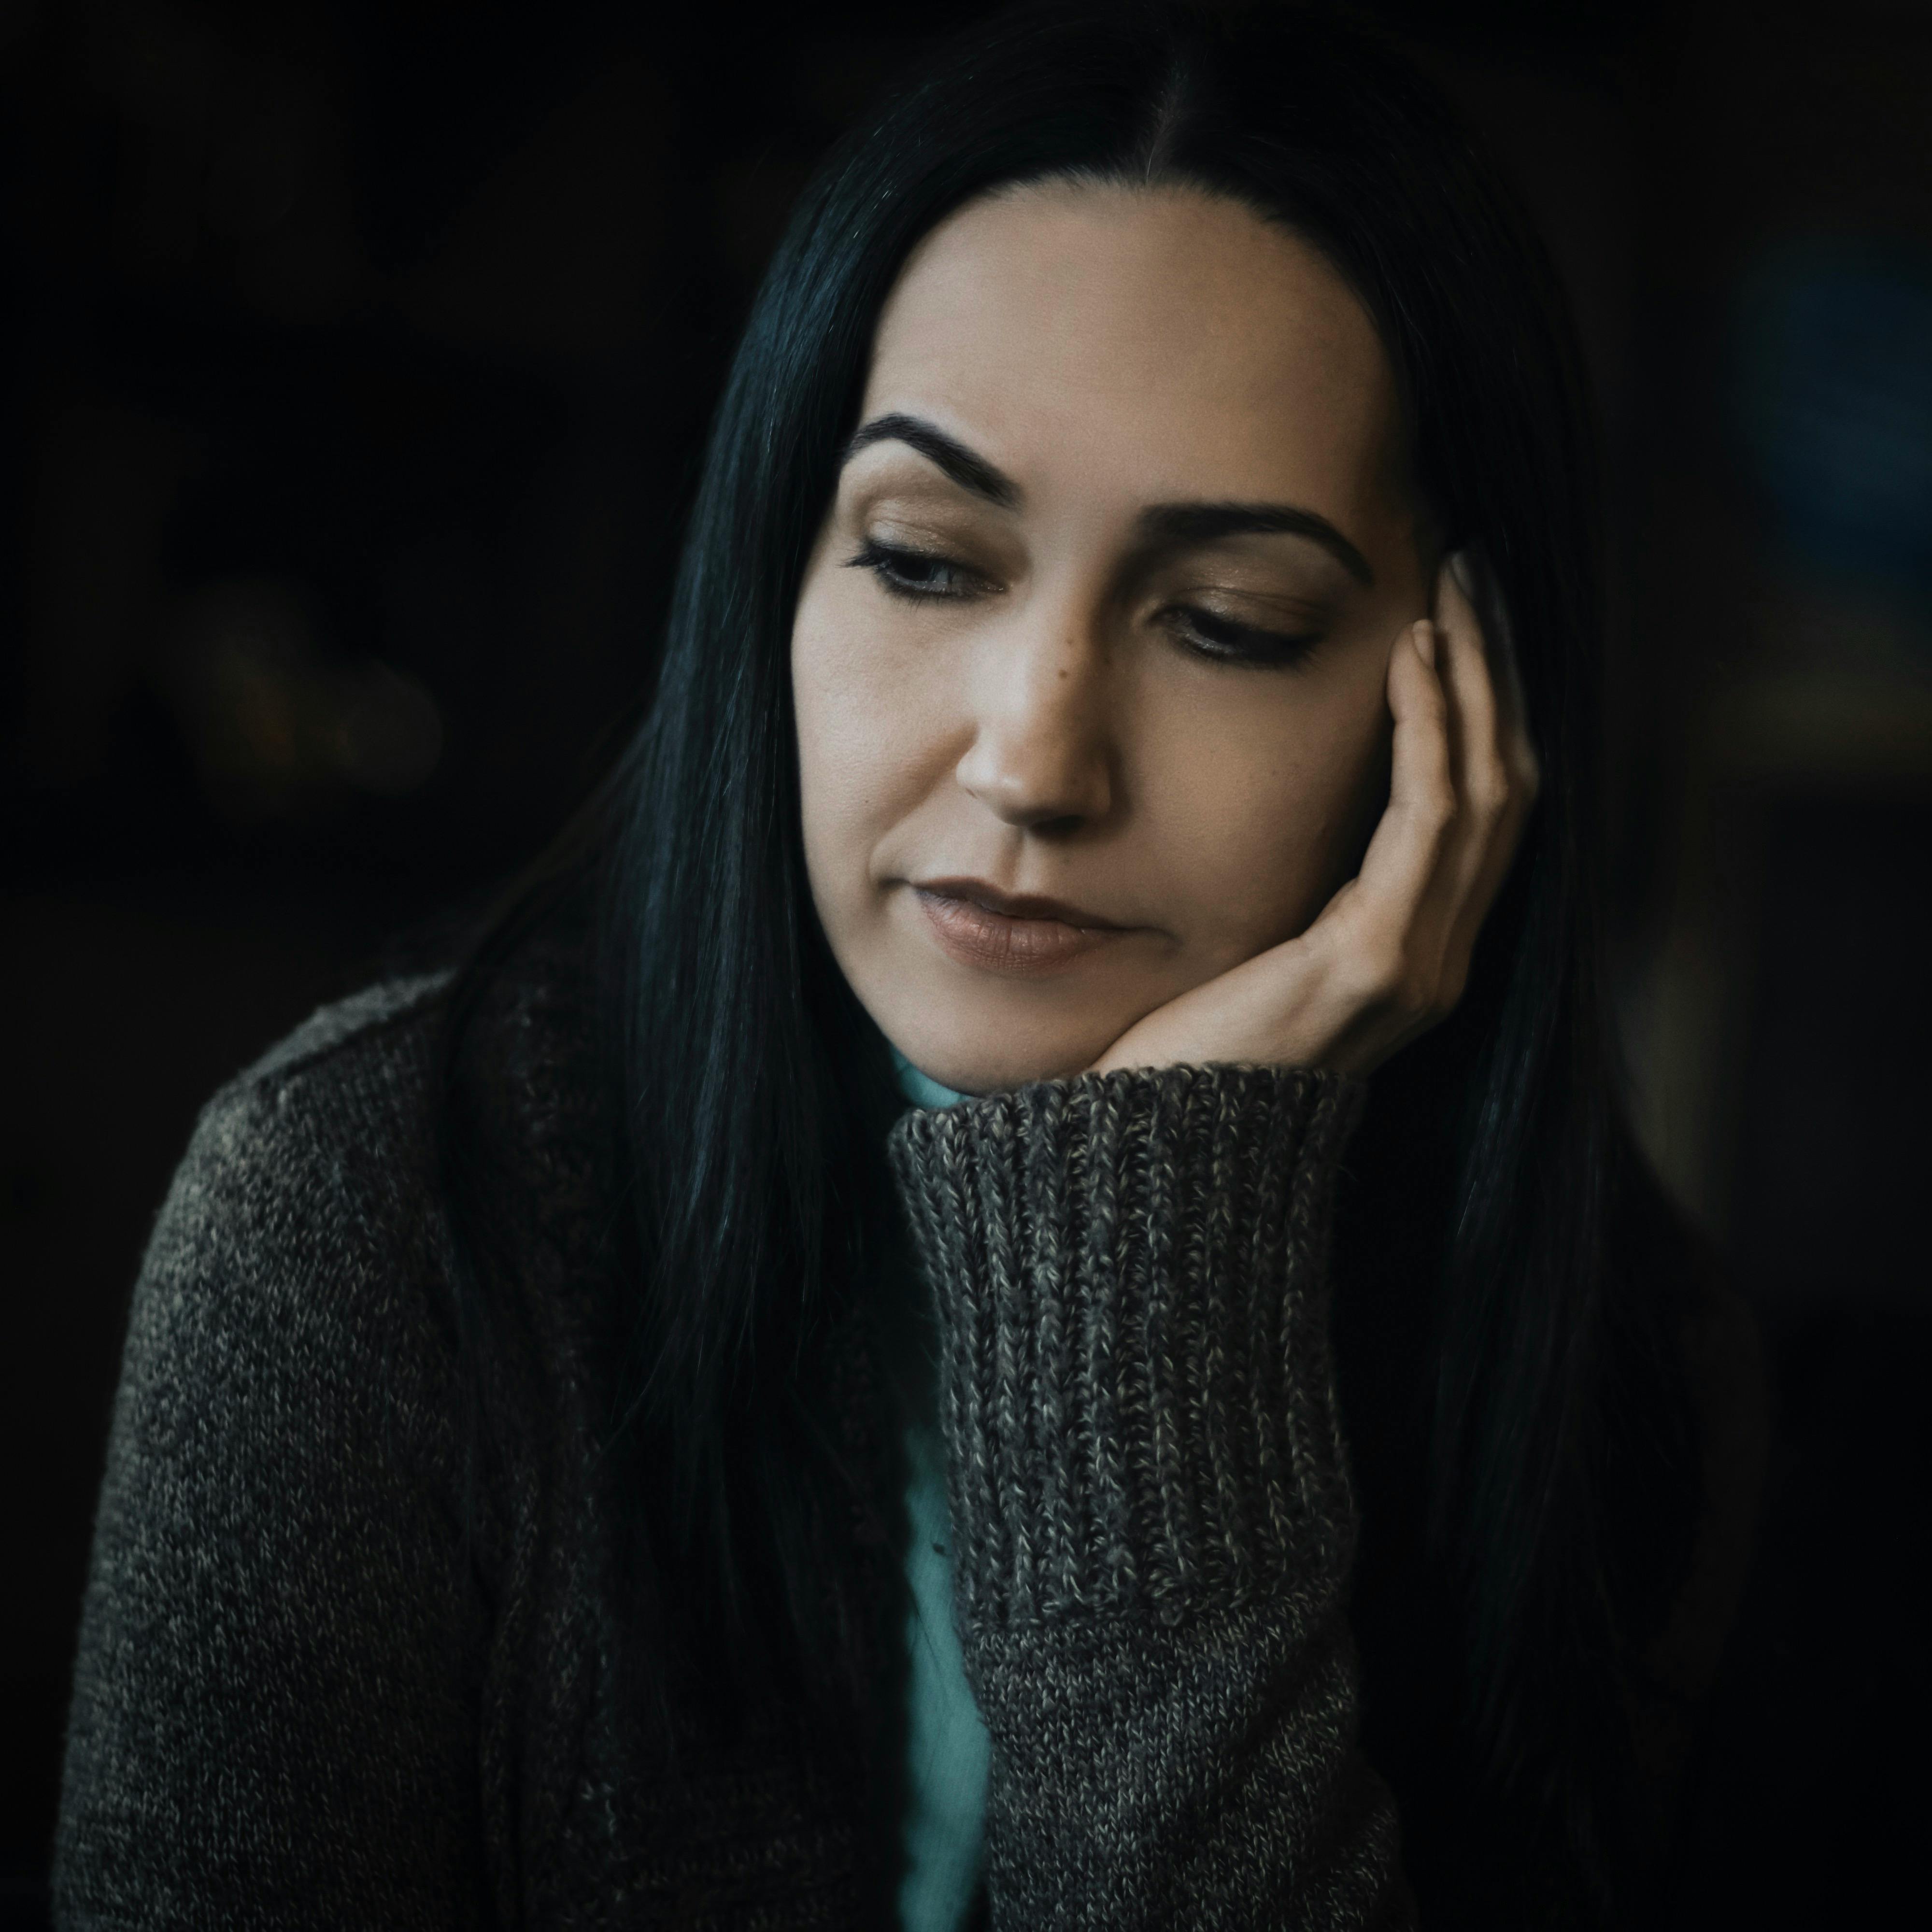 A woman wearing a gray sweater and looking sad. | Photo: Pexels